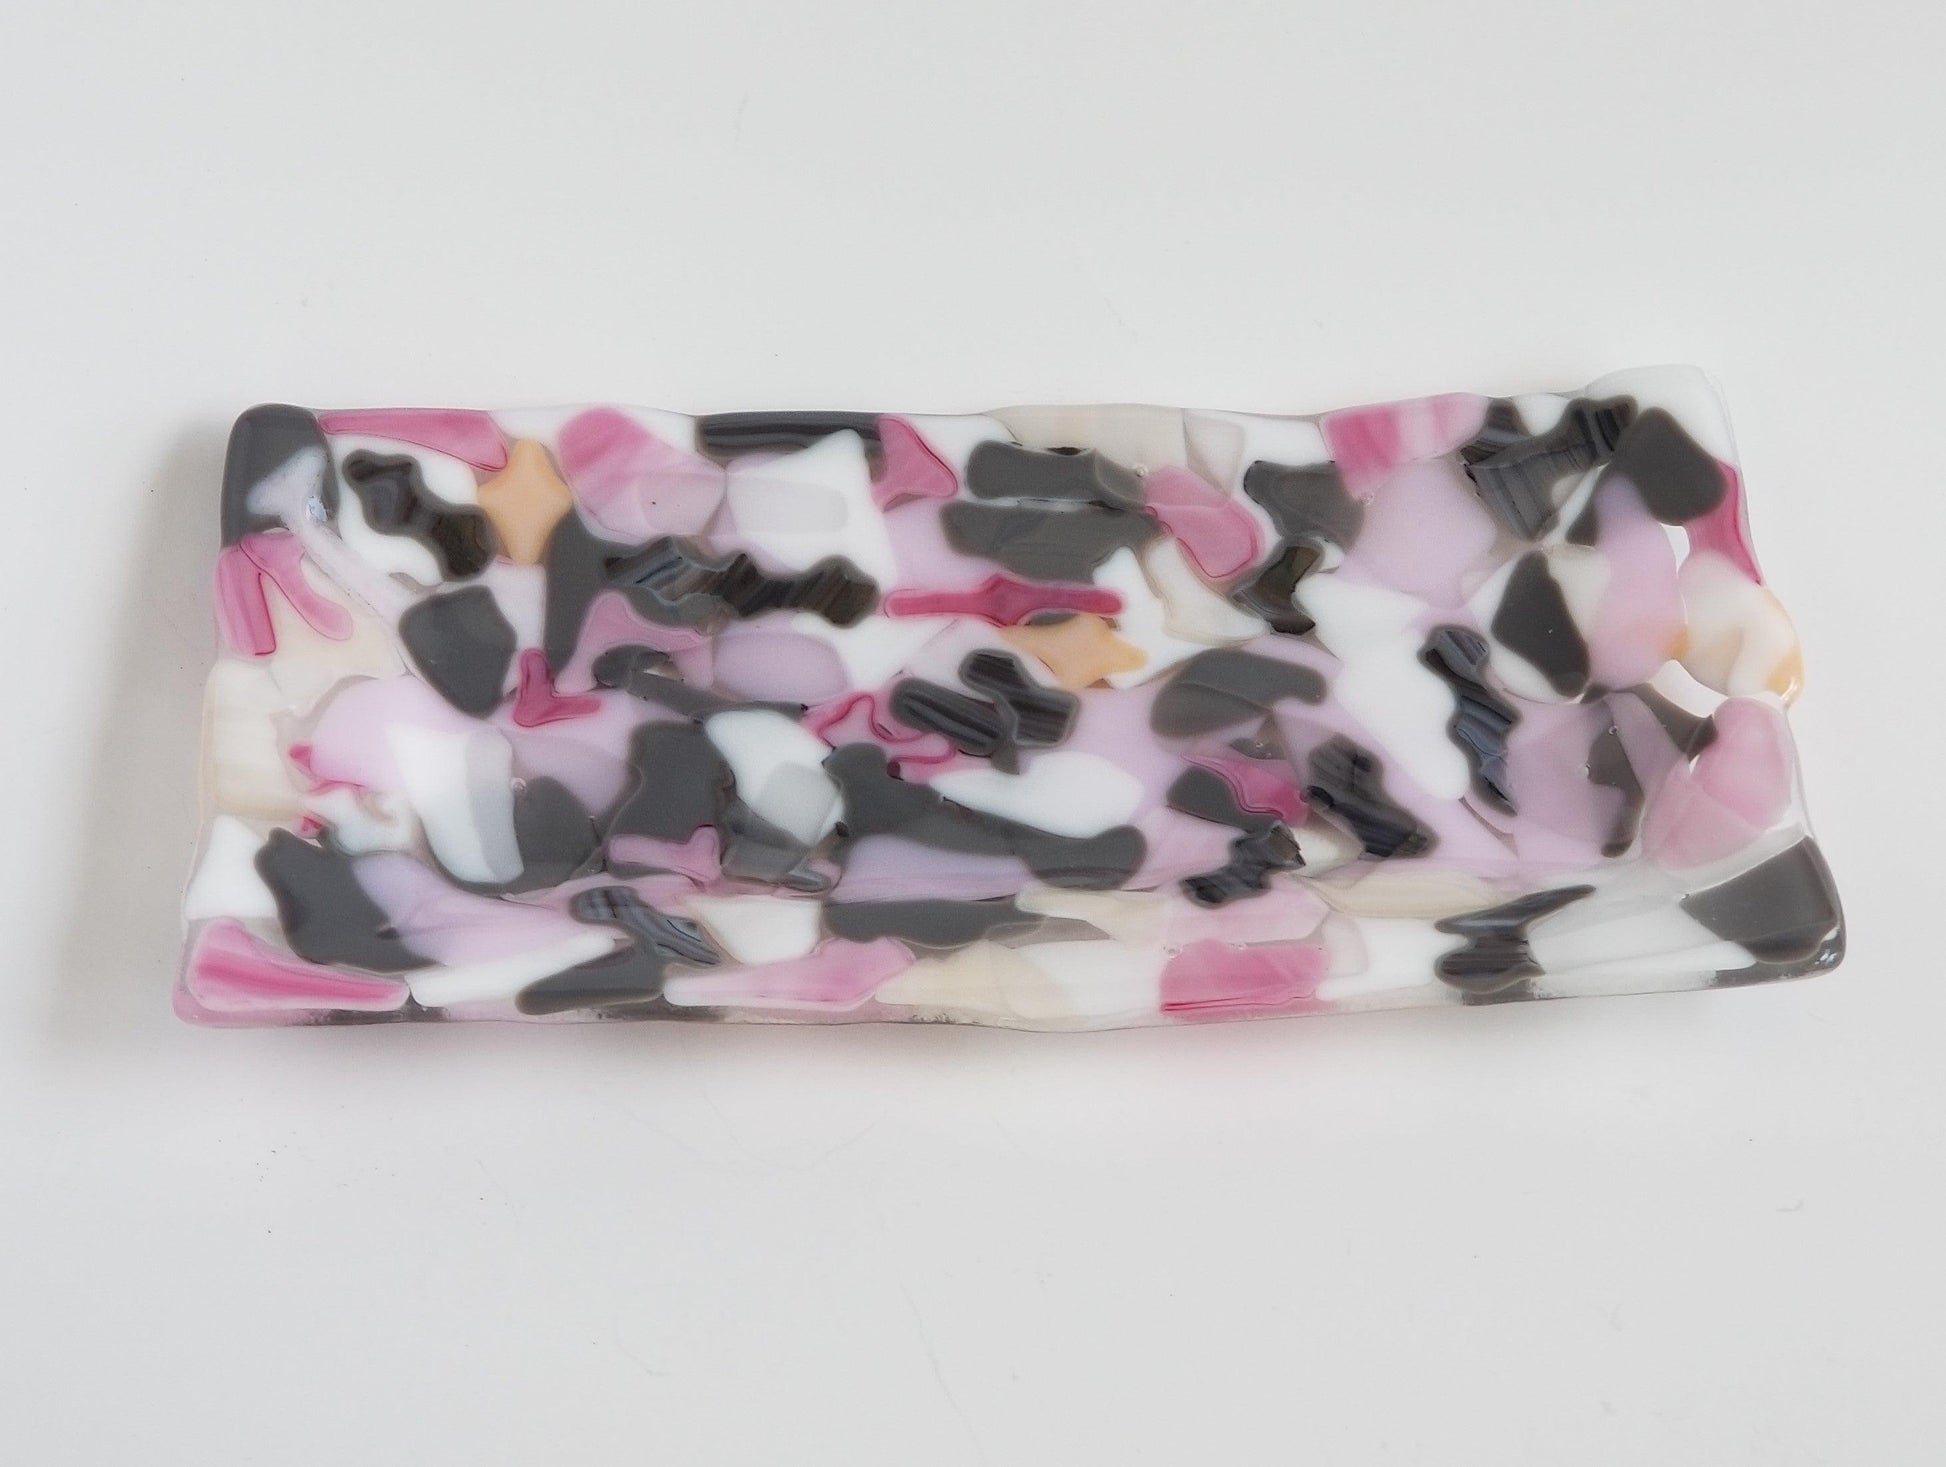 pink gray and white fused glass serving platter, spa and candle from seeds glassworks